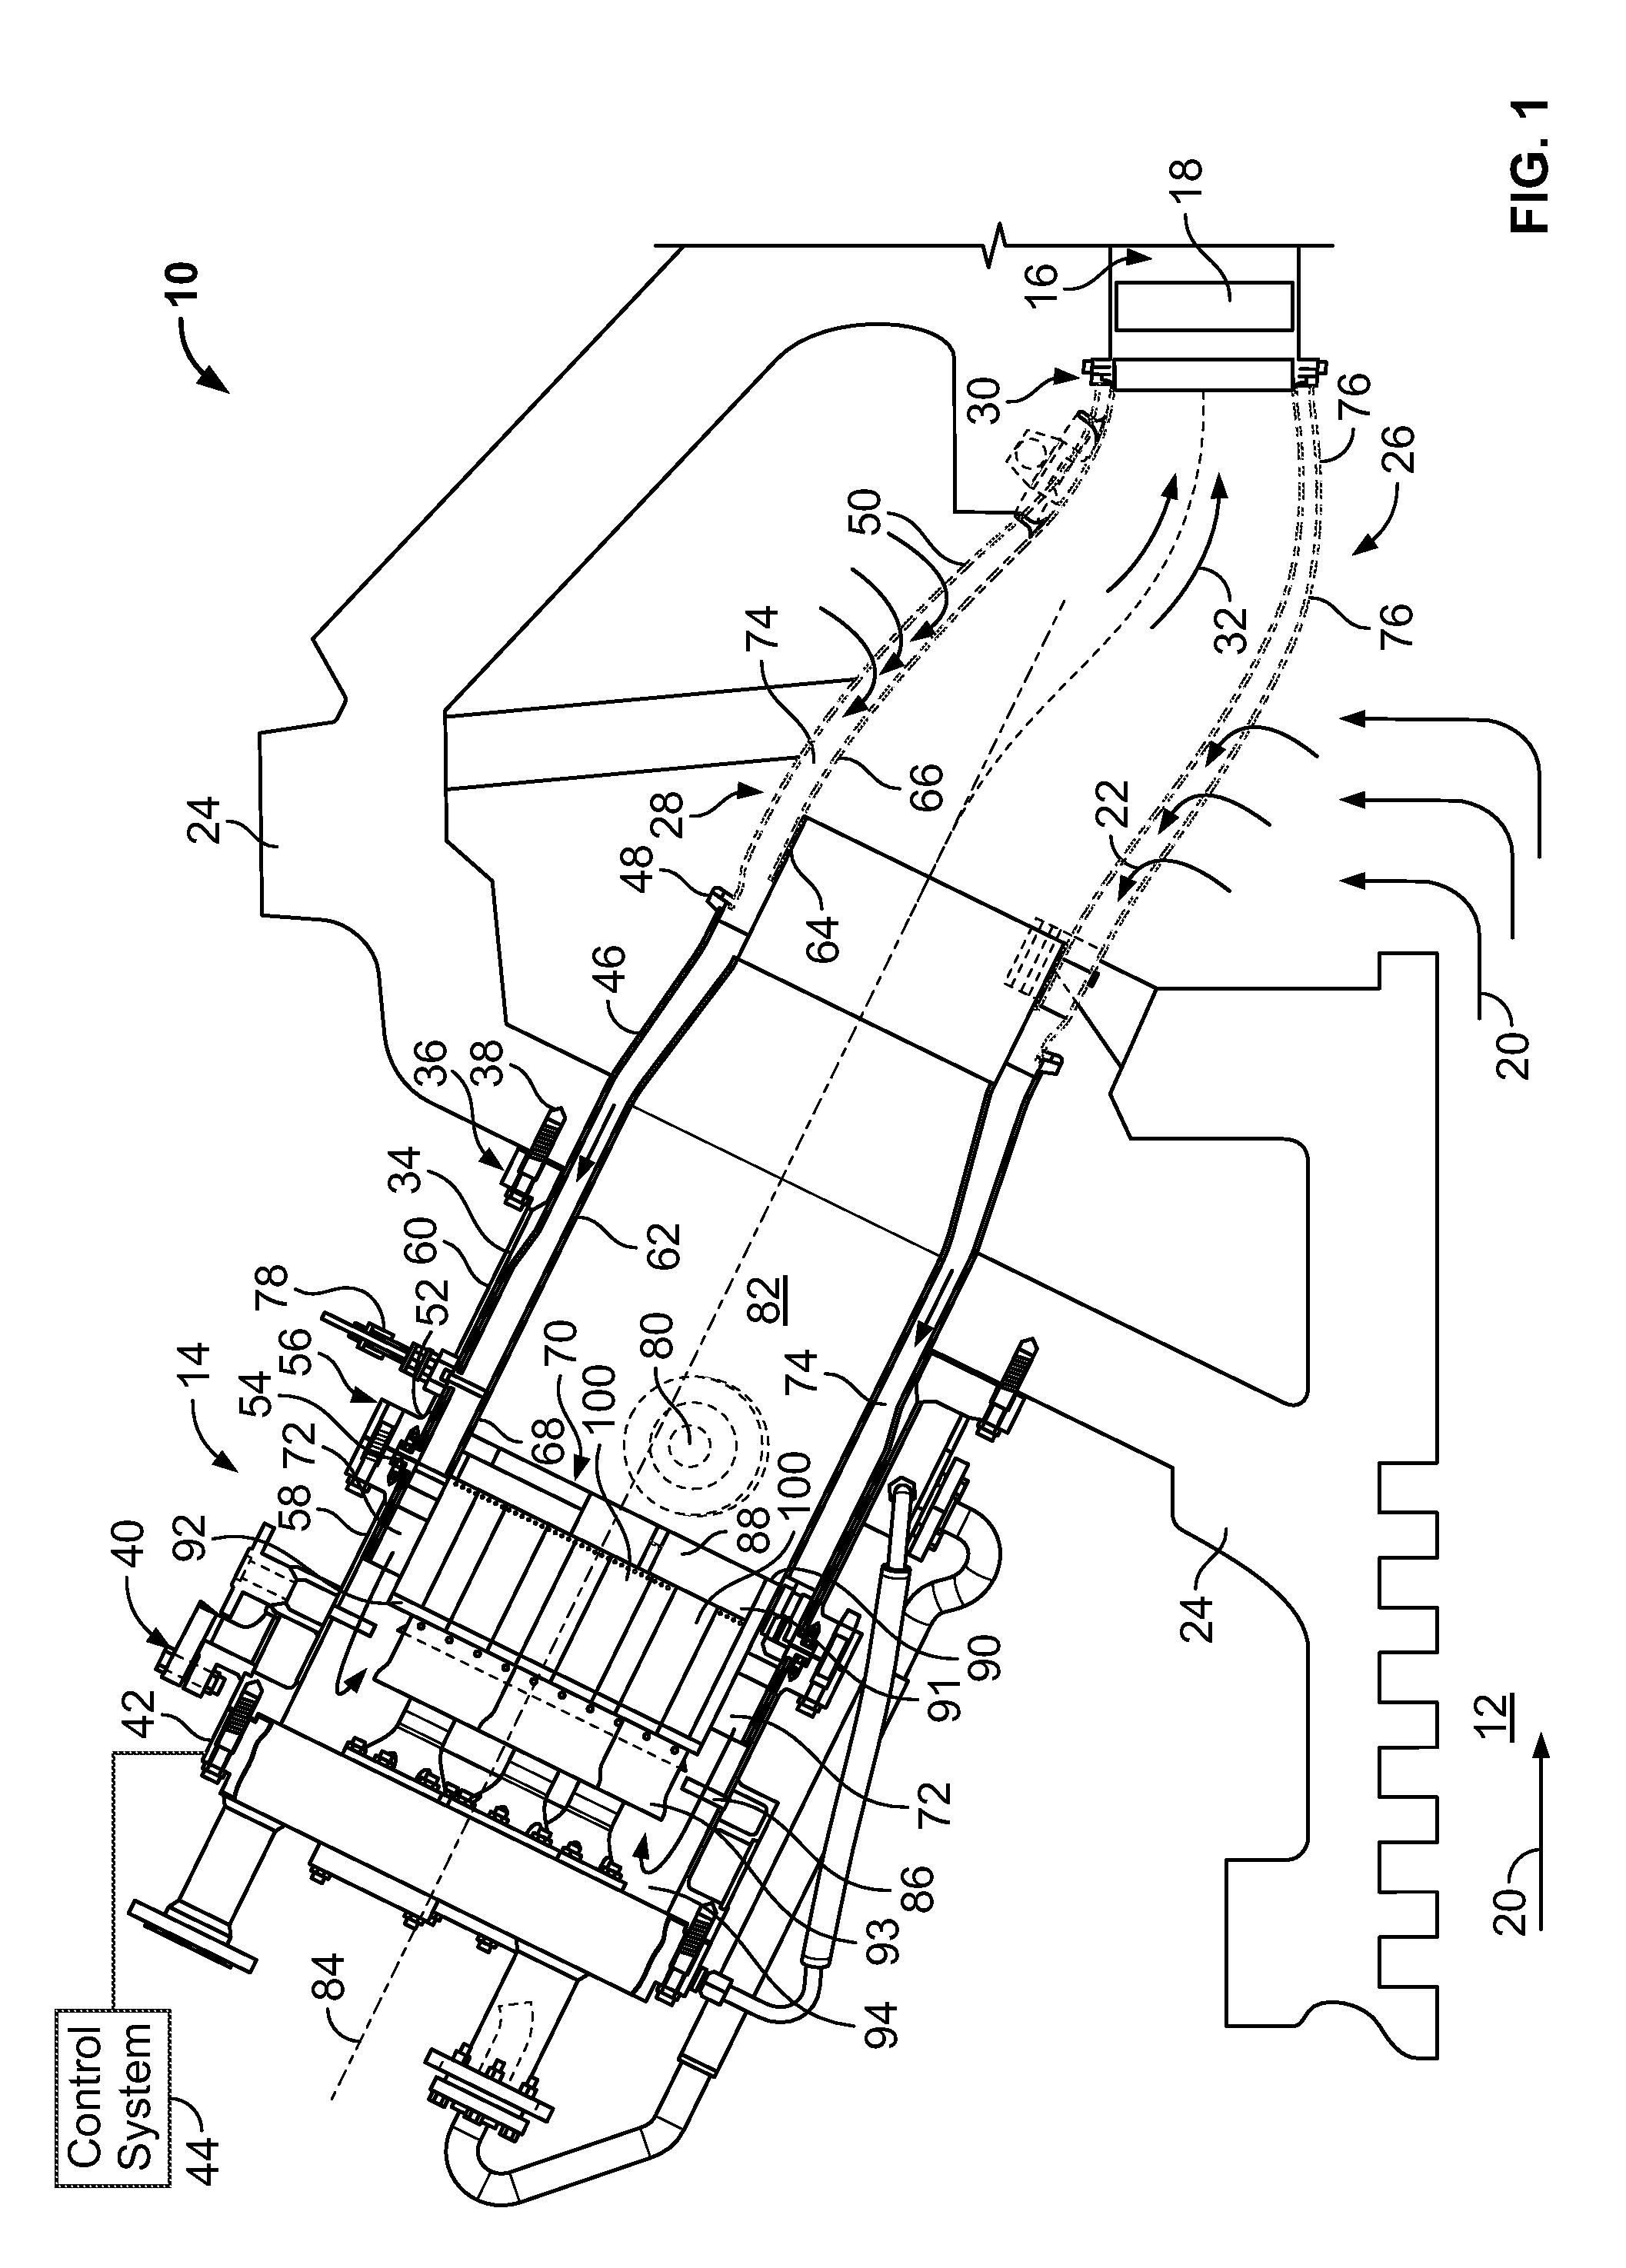 Method and apparatus for combusting fuel within a gas turbine engine